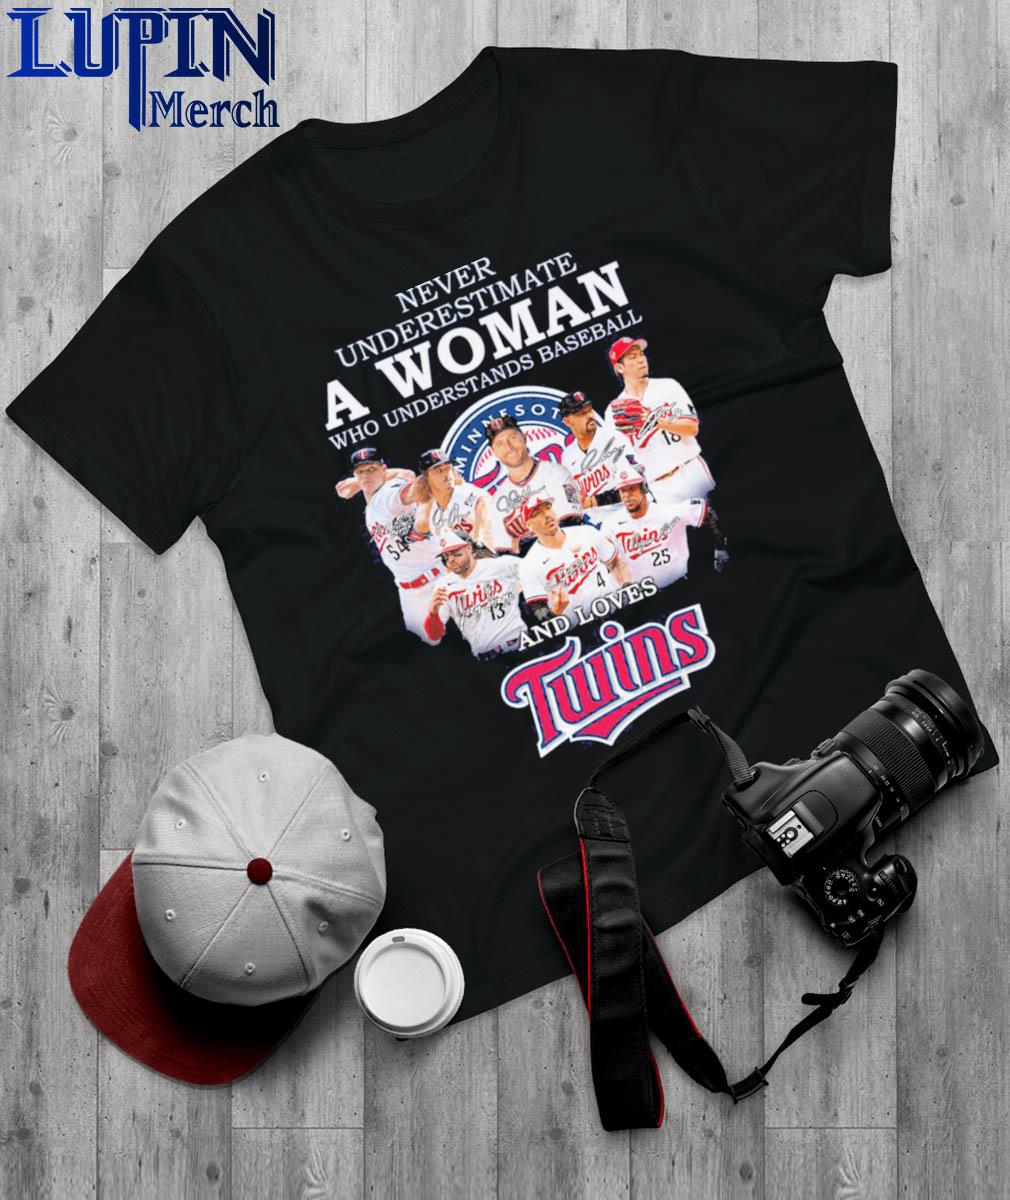 Never Underestimate A Woman Who Understands Baseball And Love